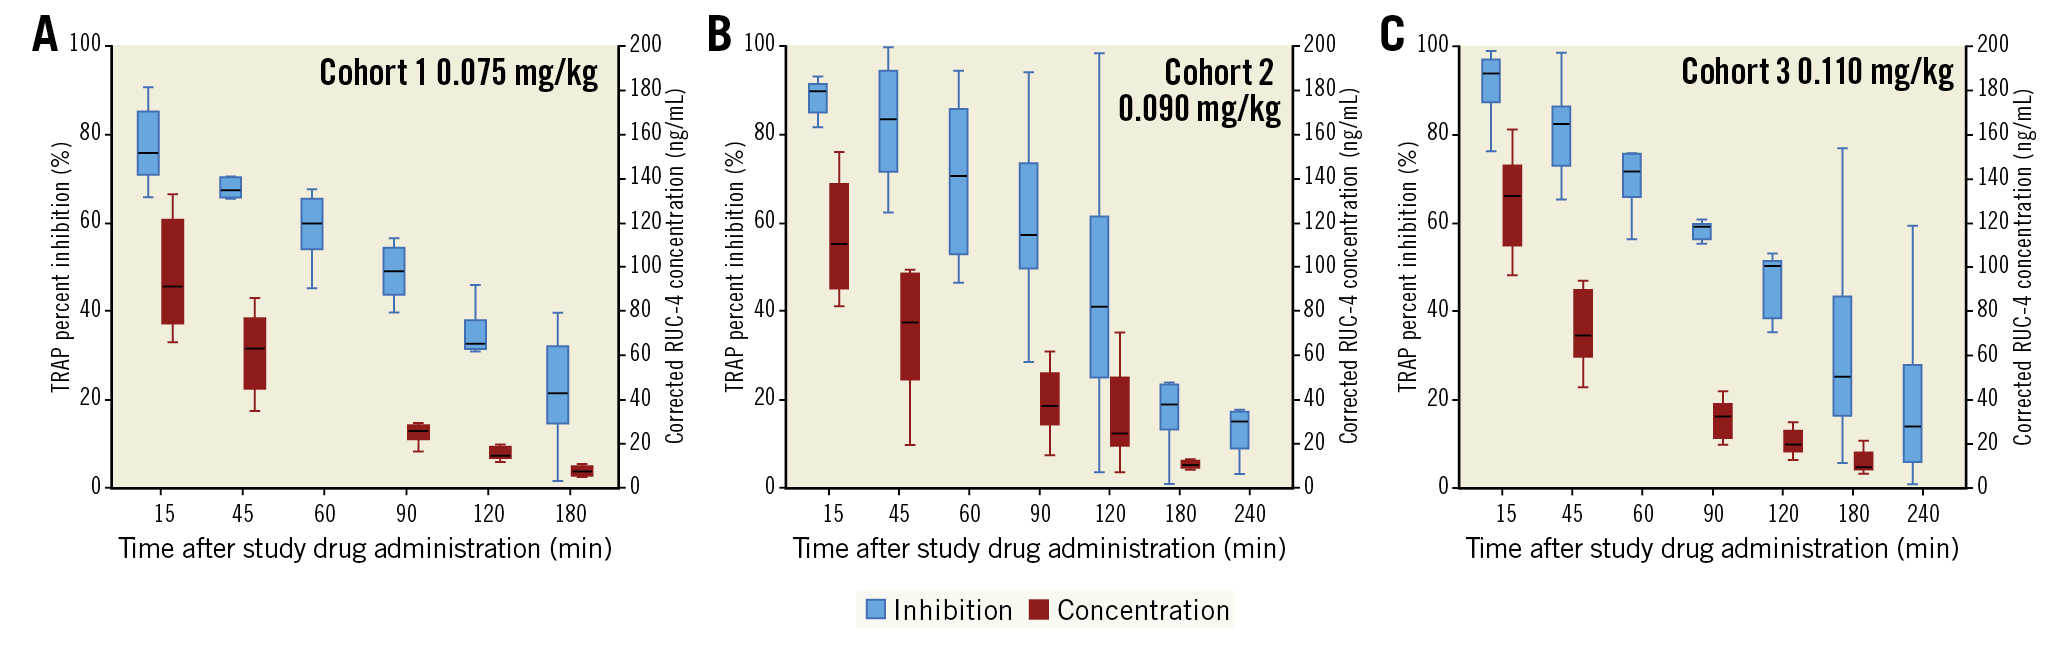 Figure 2. RUC-4 pharmacokinetics and pharmacodynamics using the iso-TRAP assay. Platelet reactivity, assessed by VerifyNow and expressed as percent inhibition of the iso-TRAP assay (blue box plots) up to 180 min (cohort 1) or 240 min (cohorts 2 and 3), and plasma concentration of RUC-4 (red) up to 180 min (cohorts 1, 2, and 3) following subcutaneous injection of RUC-4 at 0.075 mg/kg (A), 0.090 mg/kg (B) and 0.110 mg/kg (C). Box plots represent the lower (25th) quartile, median, and upper (75th) quartile. IQR: interquartile range; TRAP: thrombin receptor activating peptide